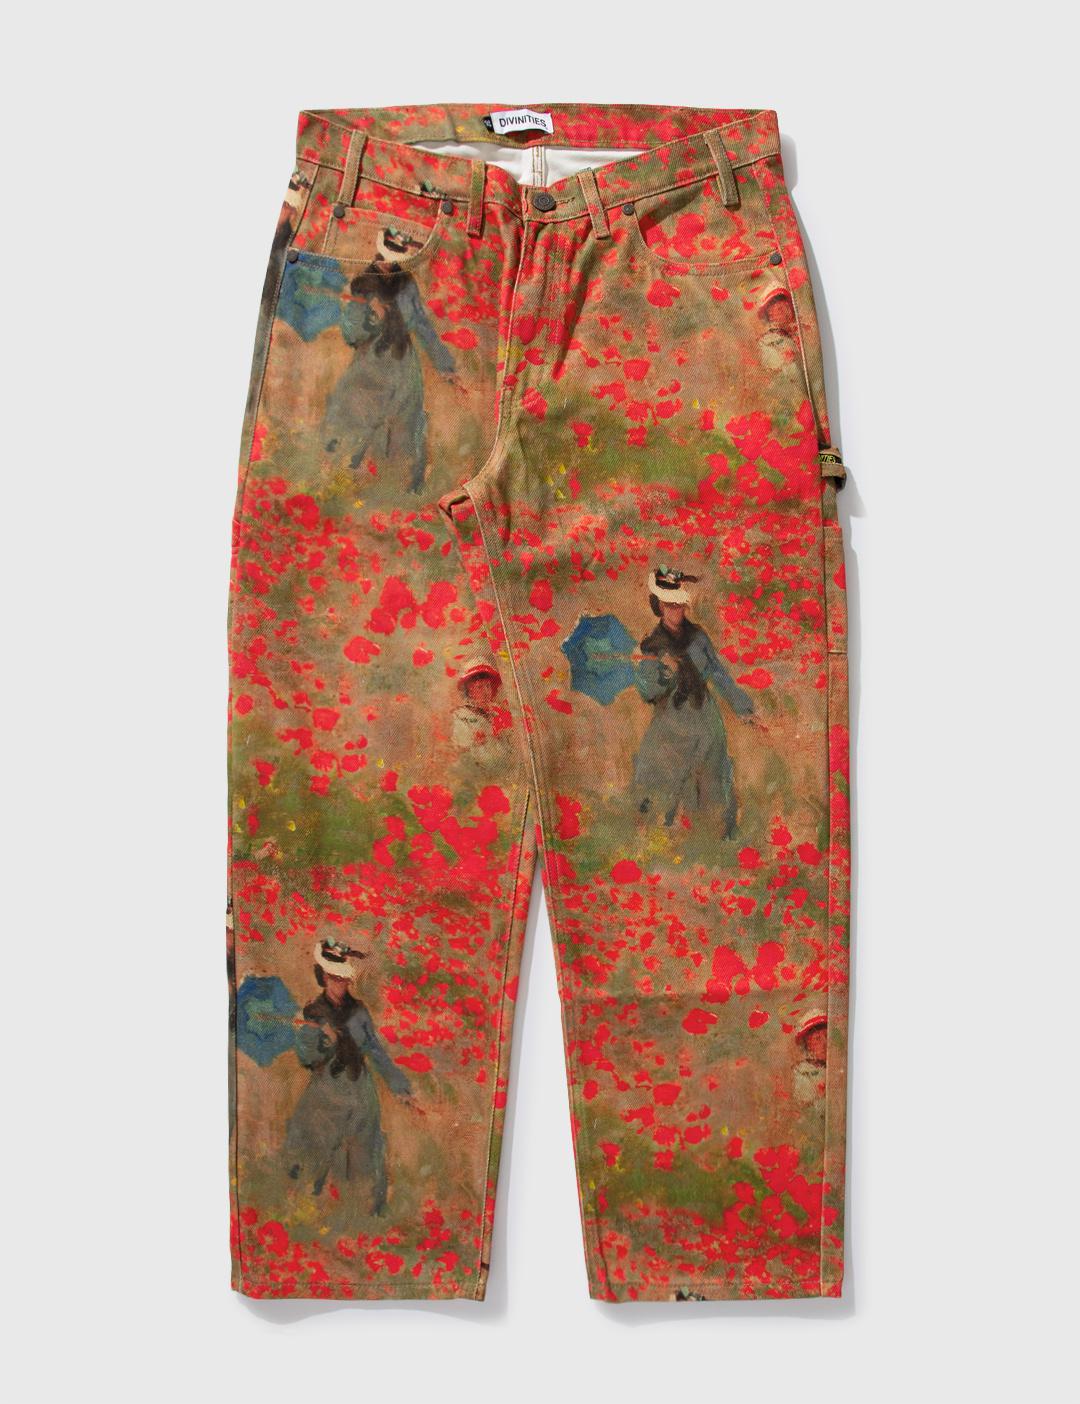 Poppies Denim Painter Jeans by DIVINITIES